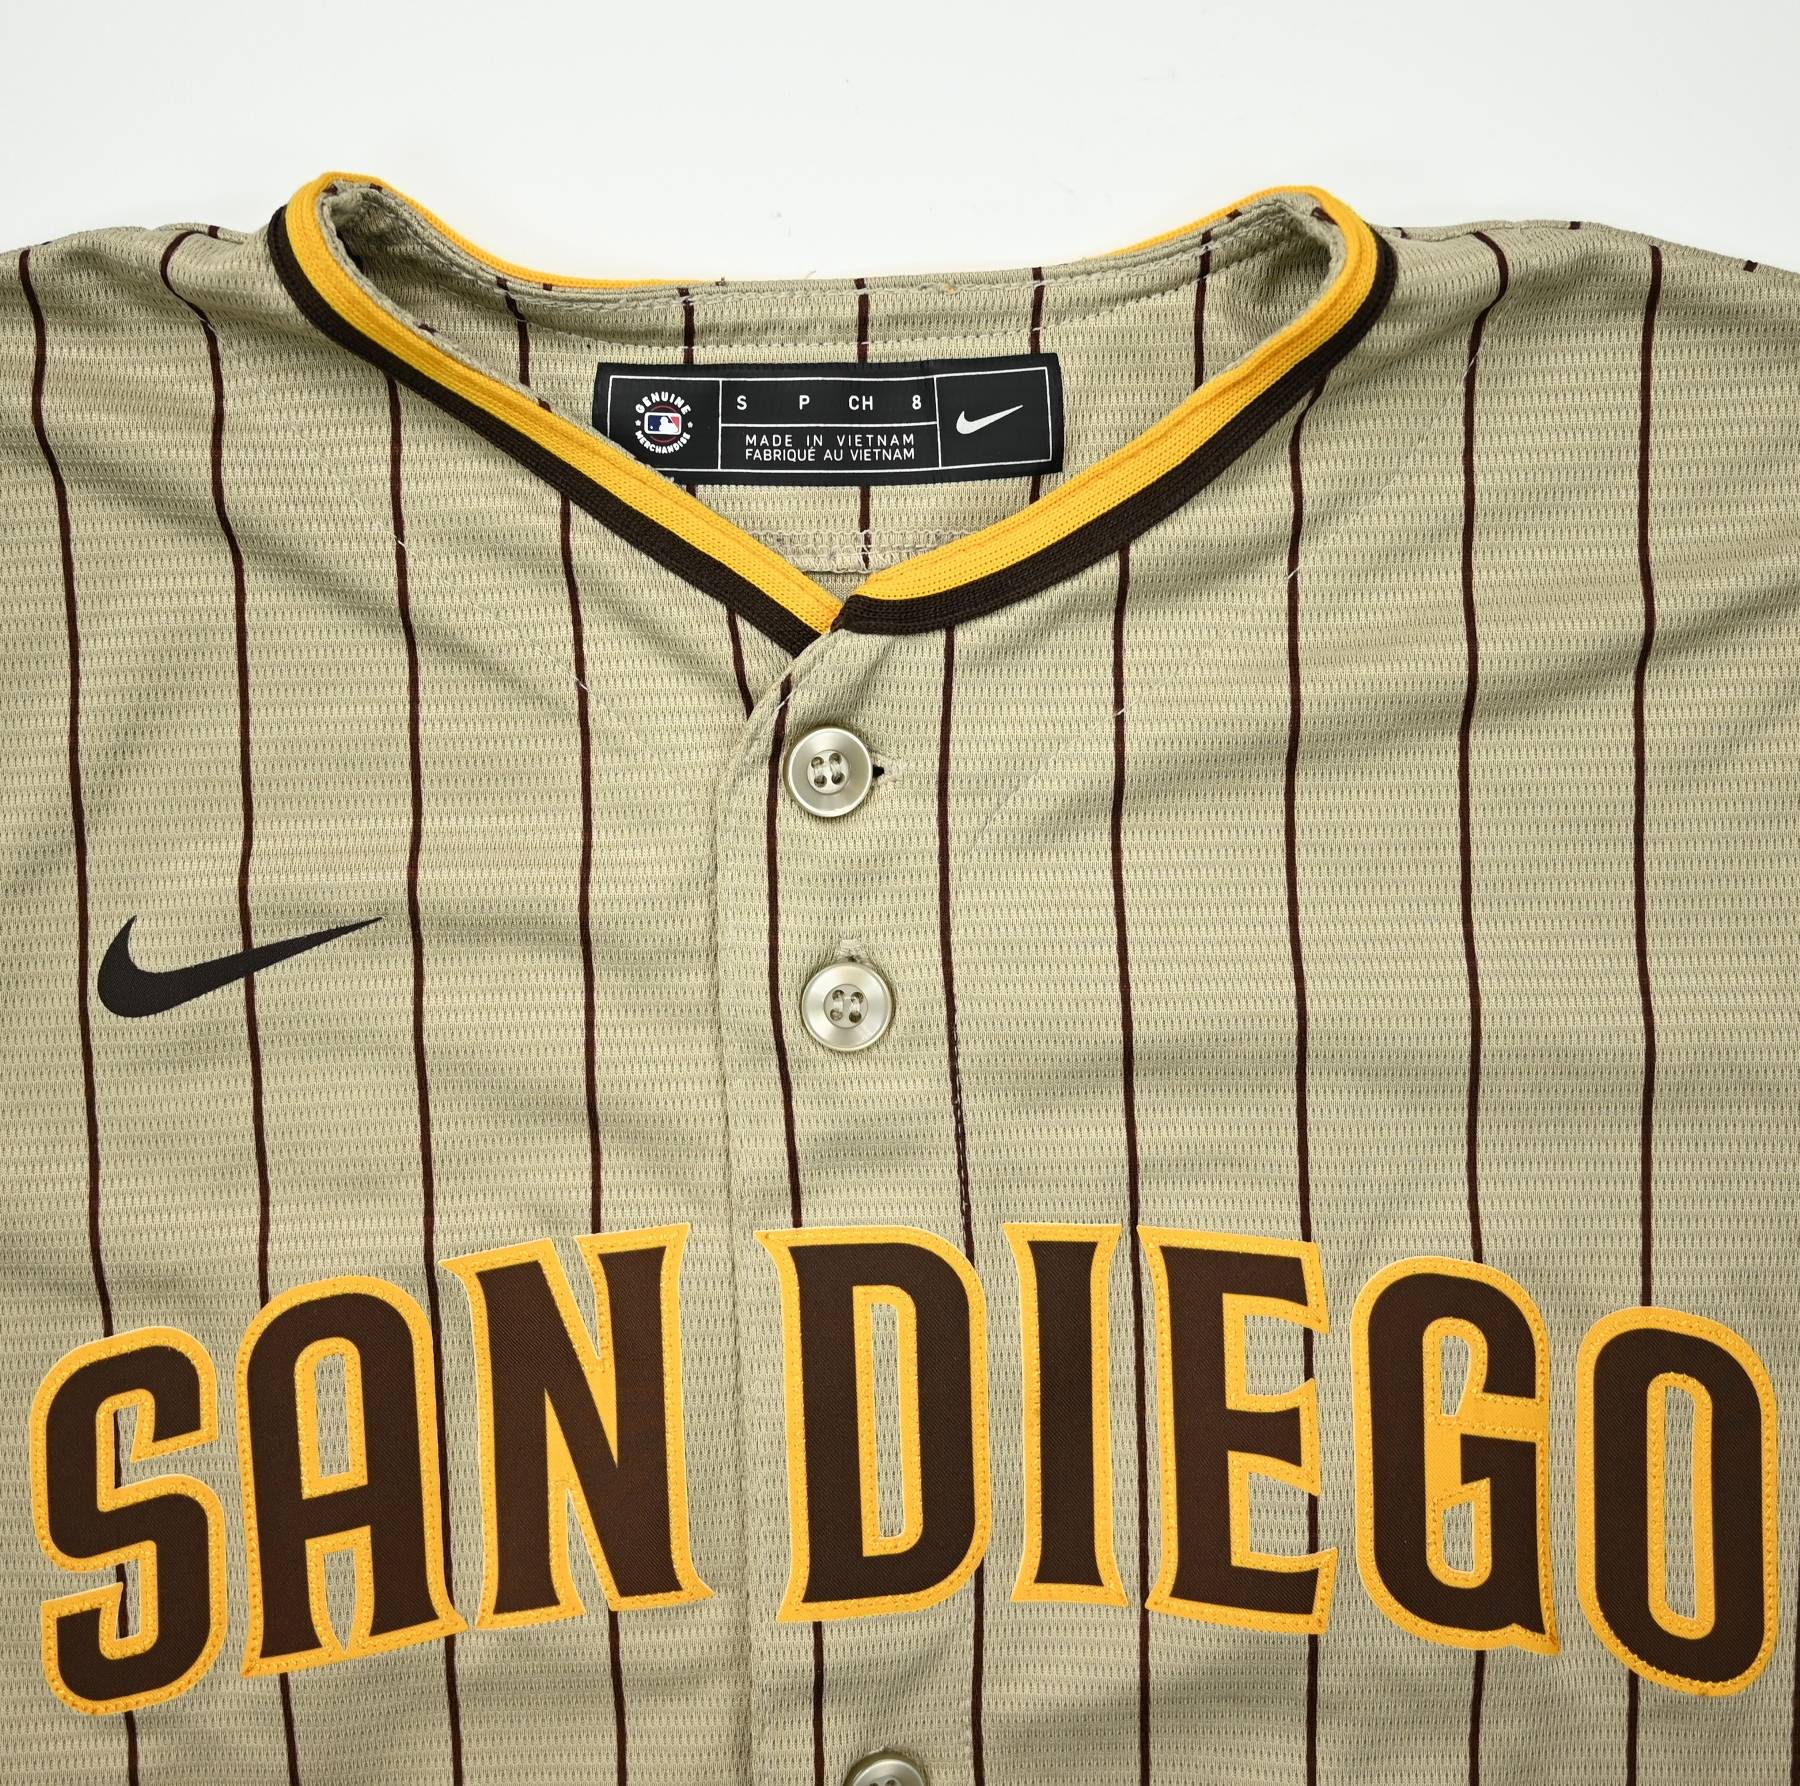 padres classic jersey